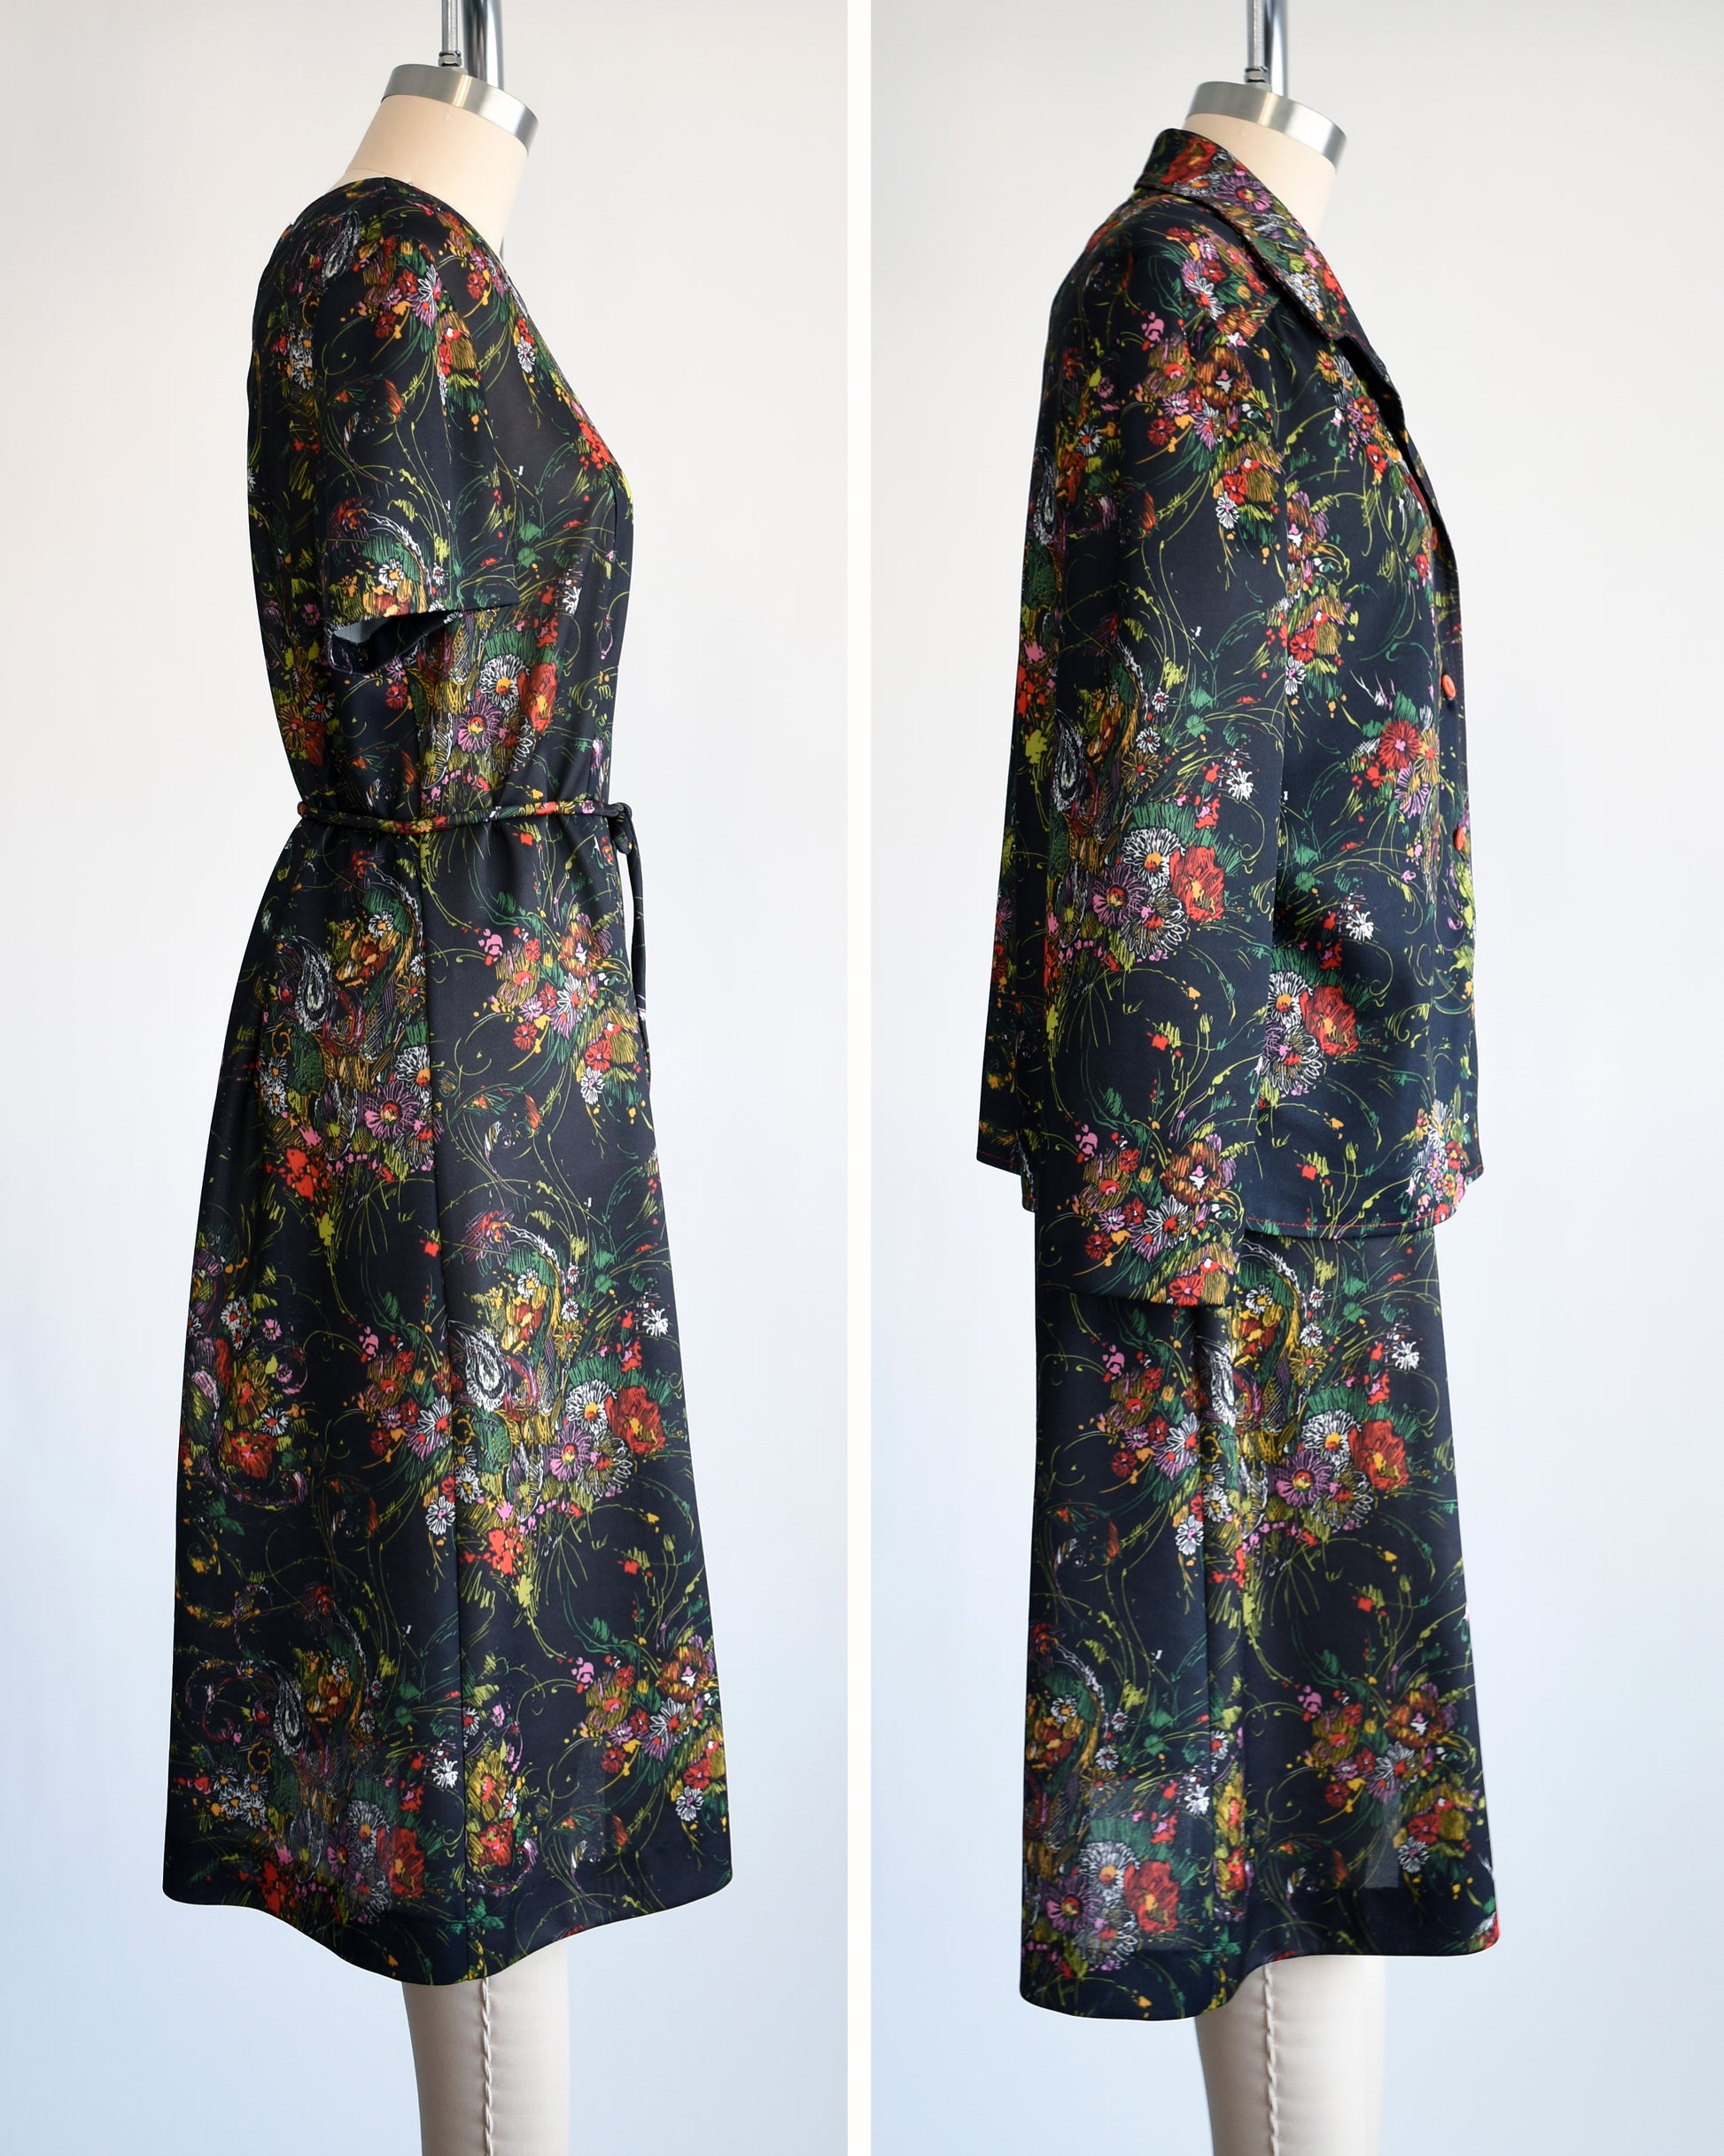 side by side views of a vintage 1970s black floral dress set that comes with a dress, a matching top, and belt